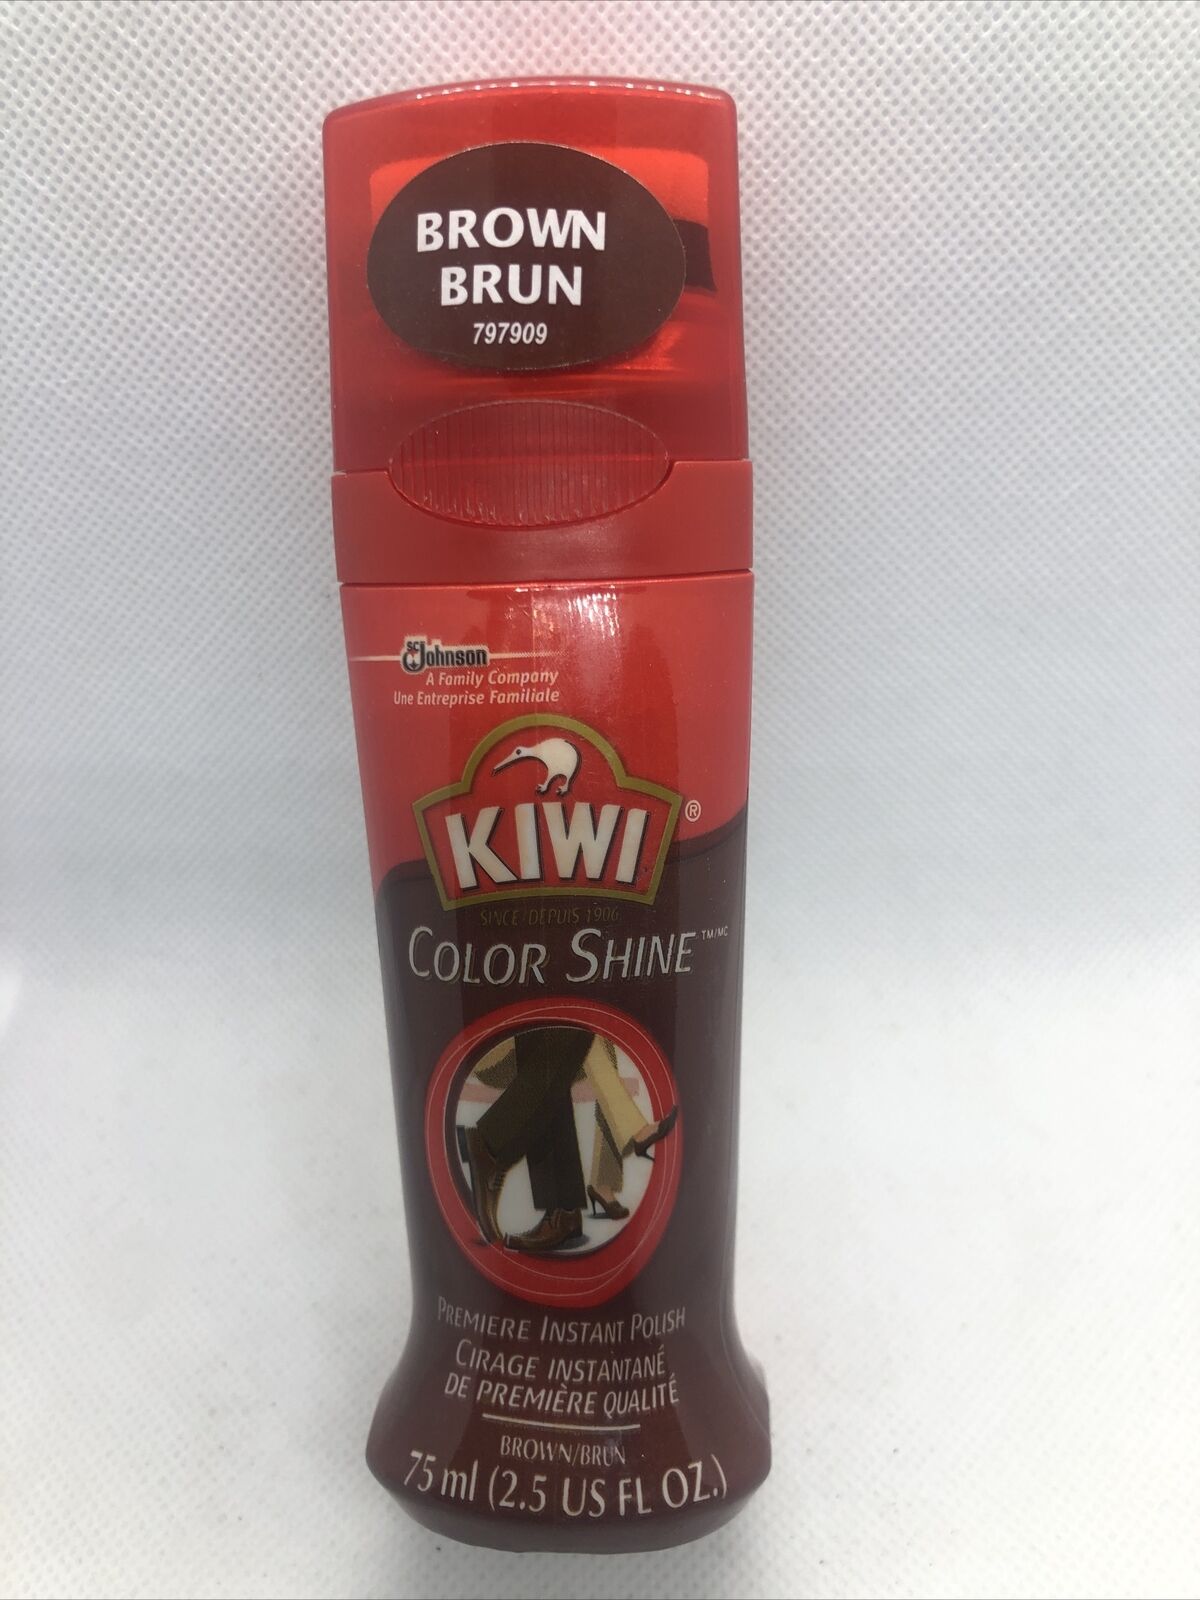 KIWI Brown Shoe Polish and Shine - Leather Care for Dress Shoes and Boots